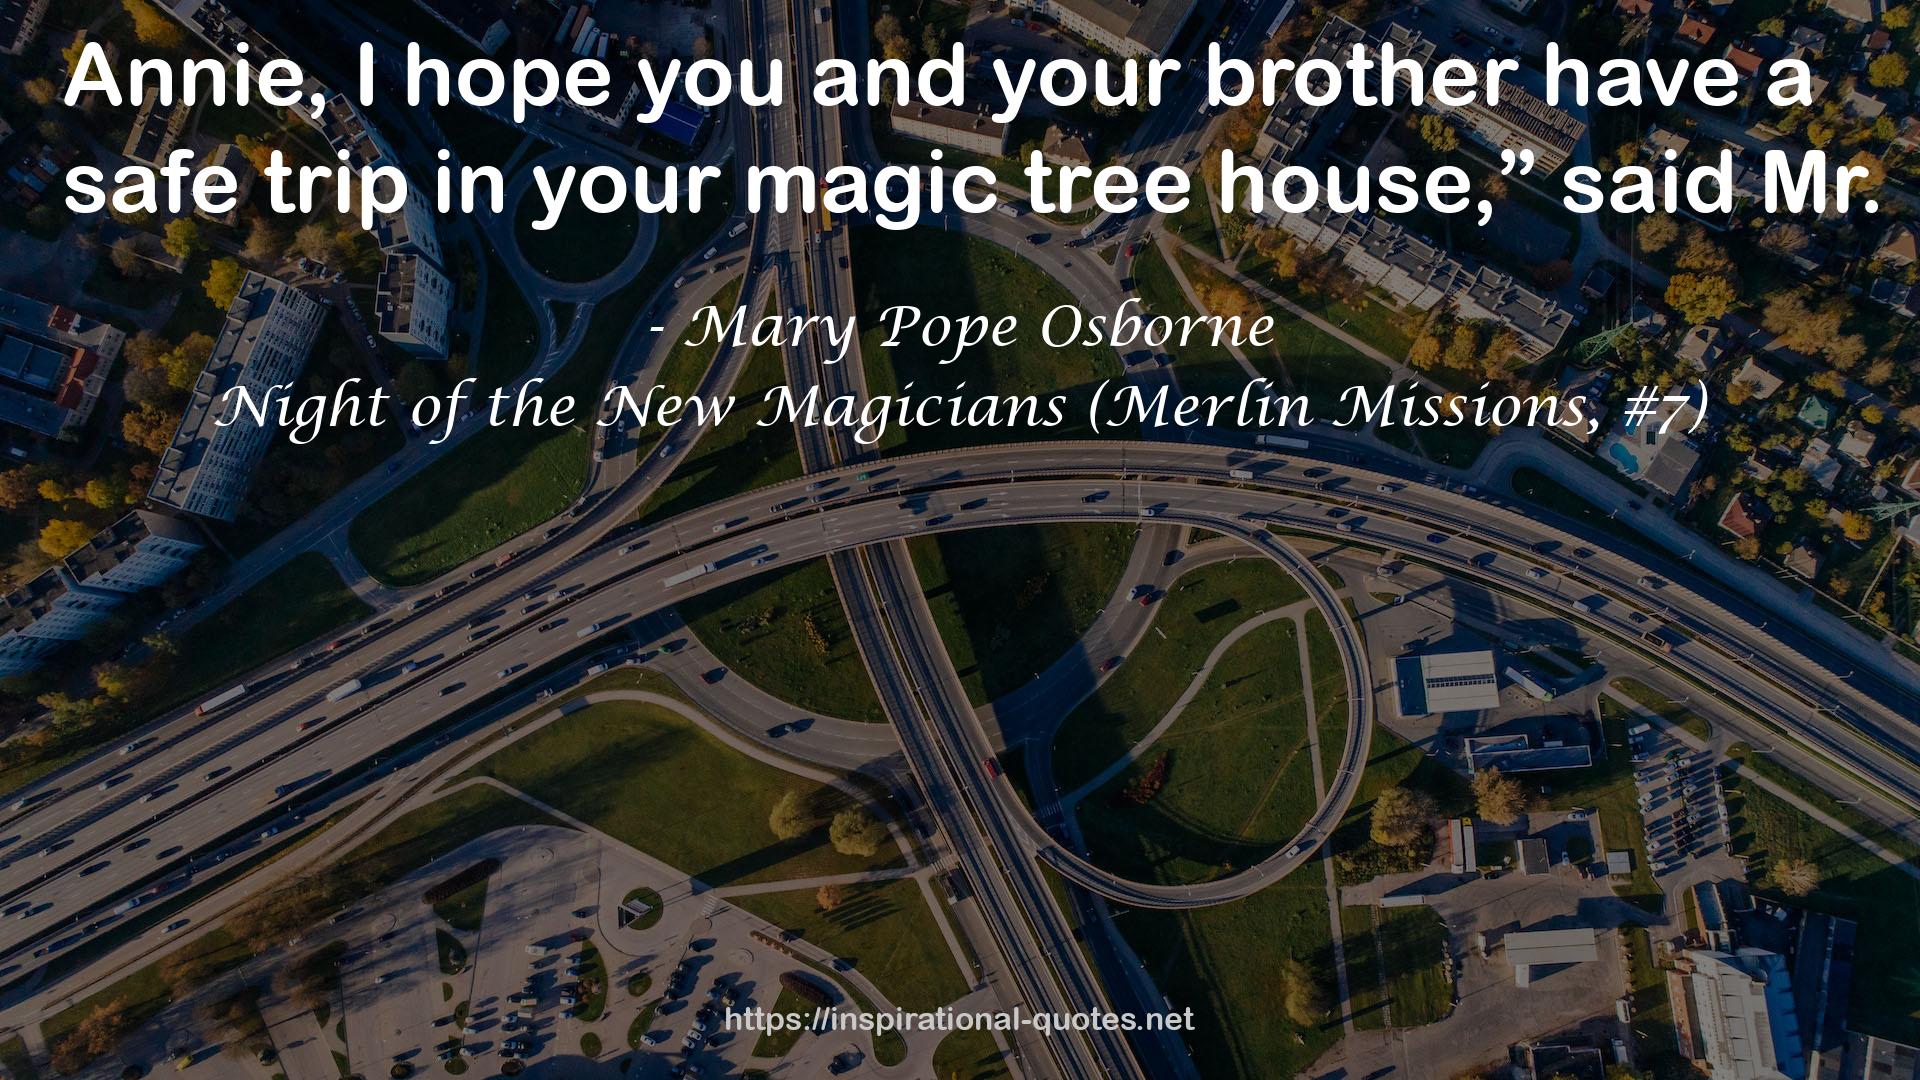 Night of the New Magicians (Merlin Missions, #7) QUOTES